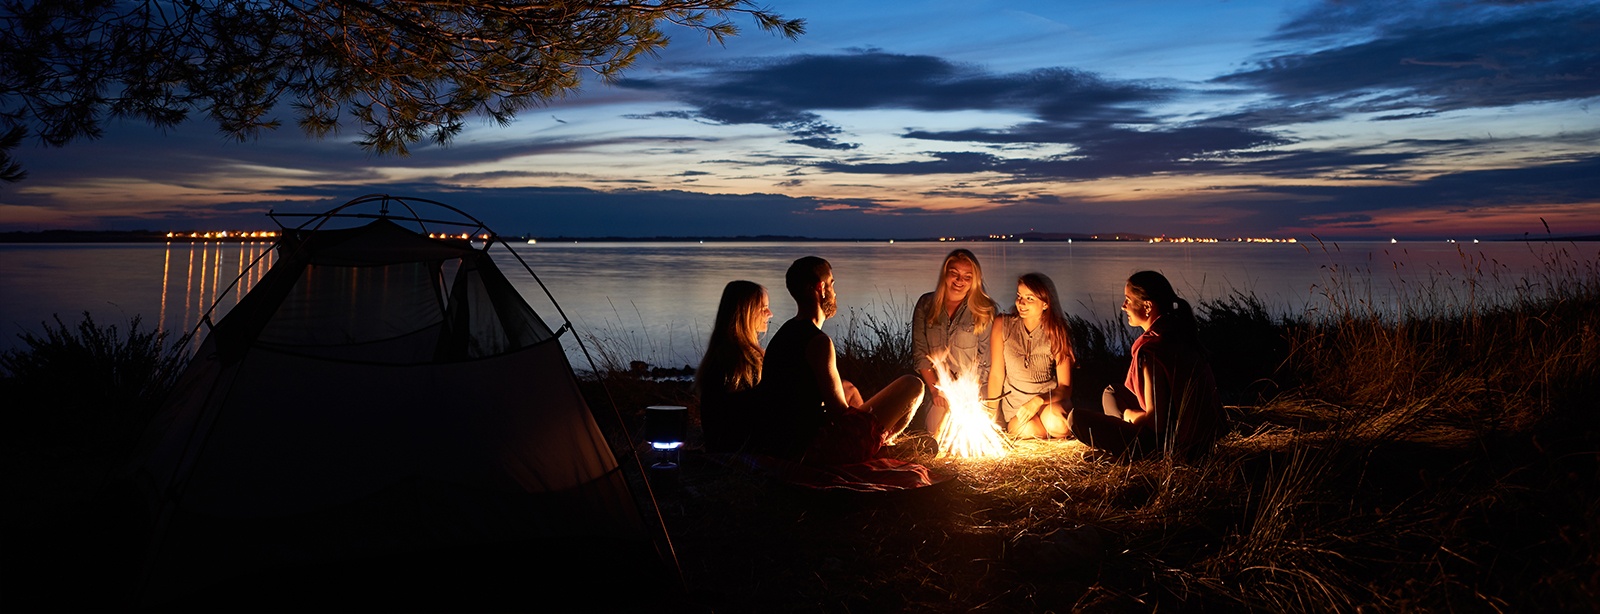 Blog by Carefree Camping Rentals 